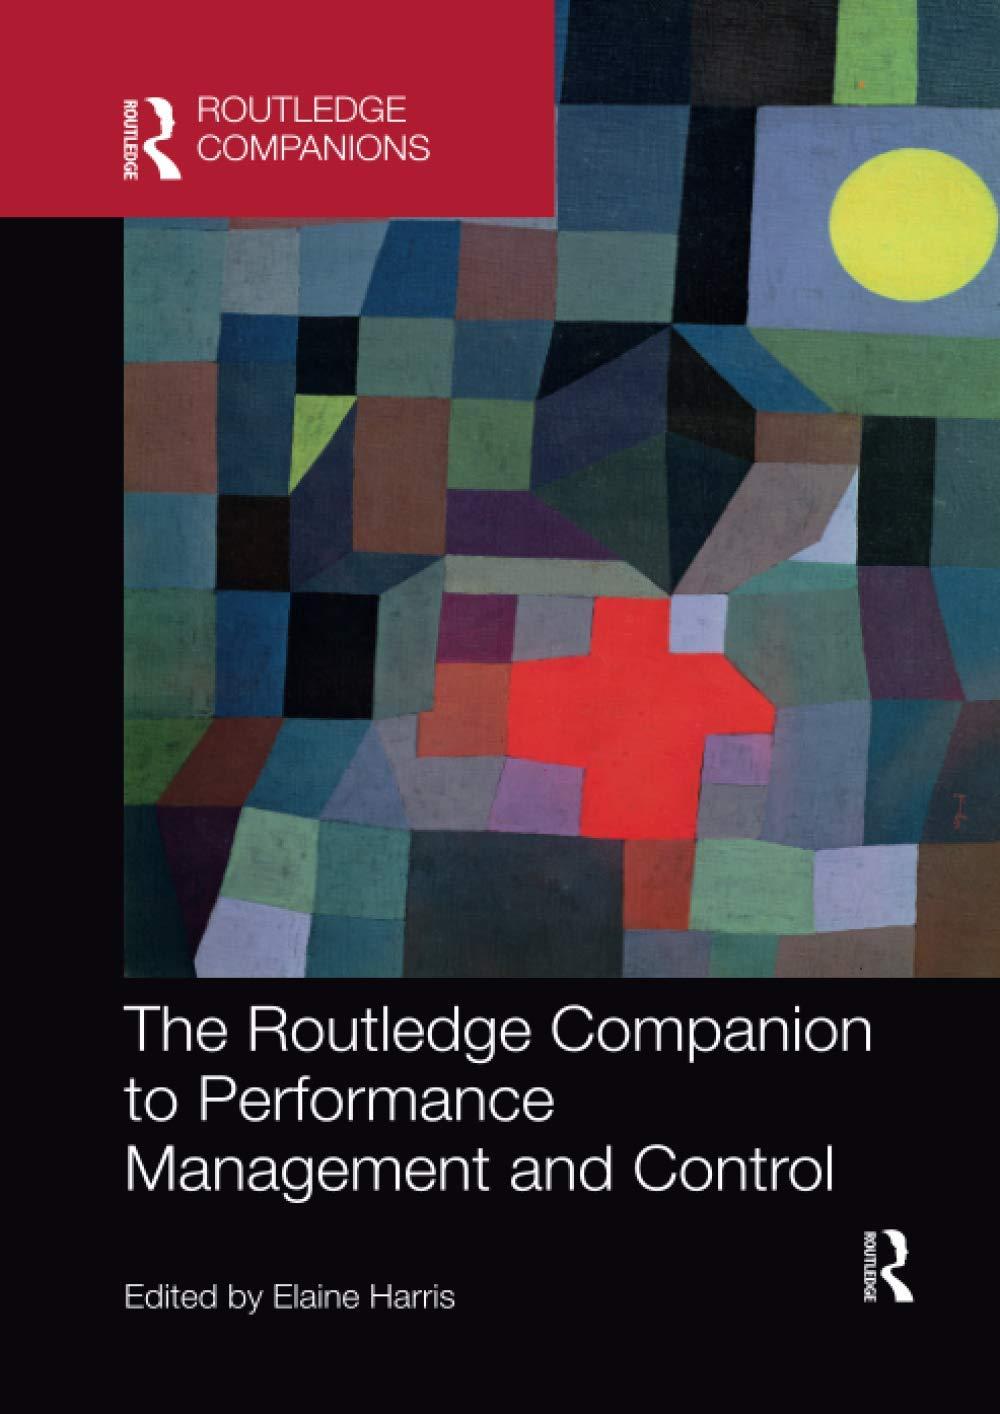 The Routledge Companion To Performance Management And Control